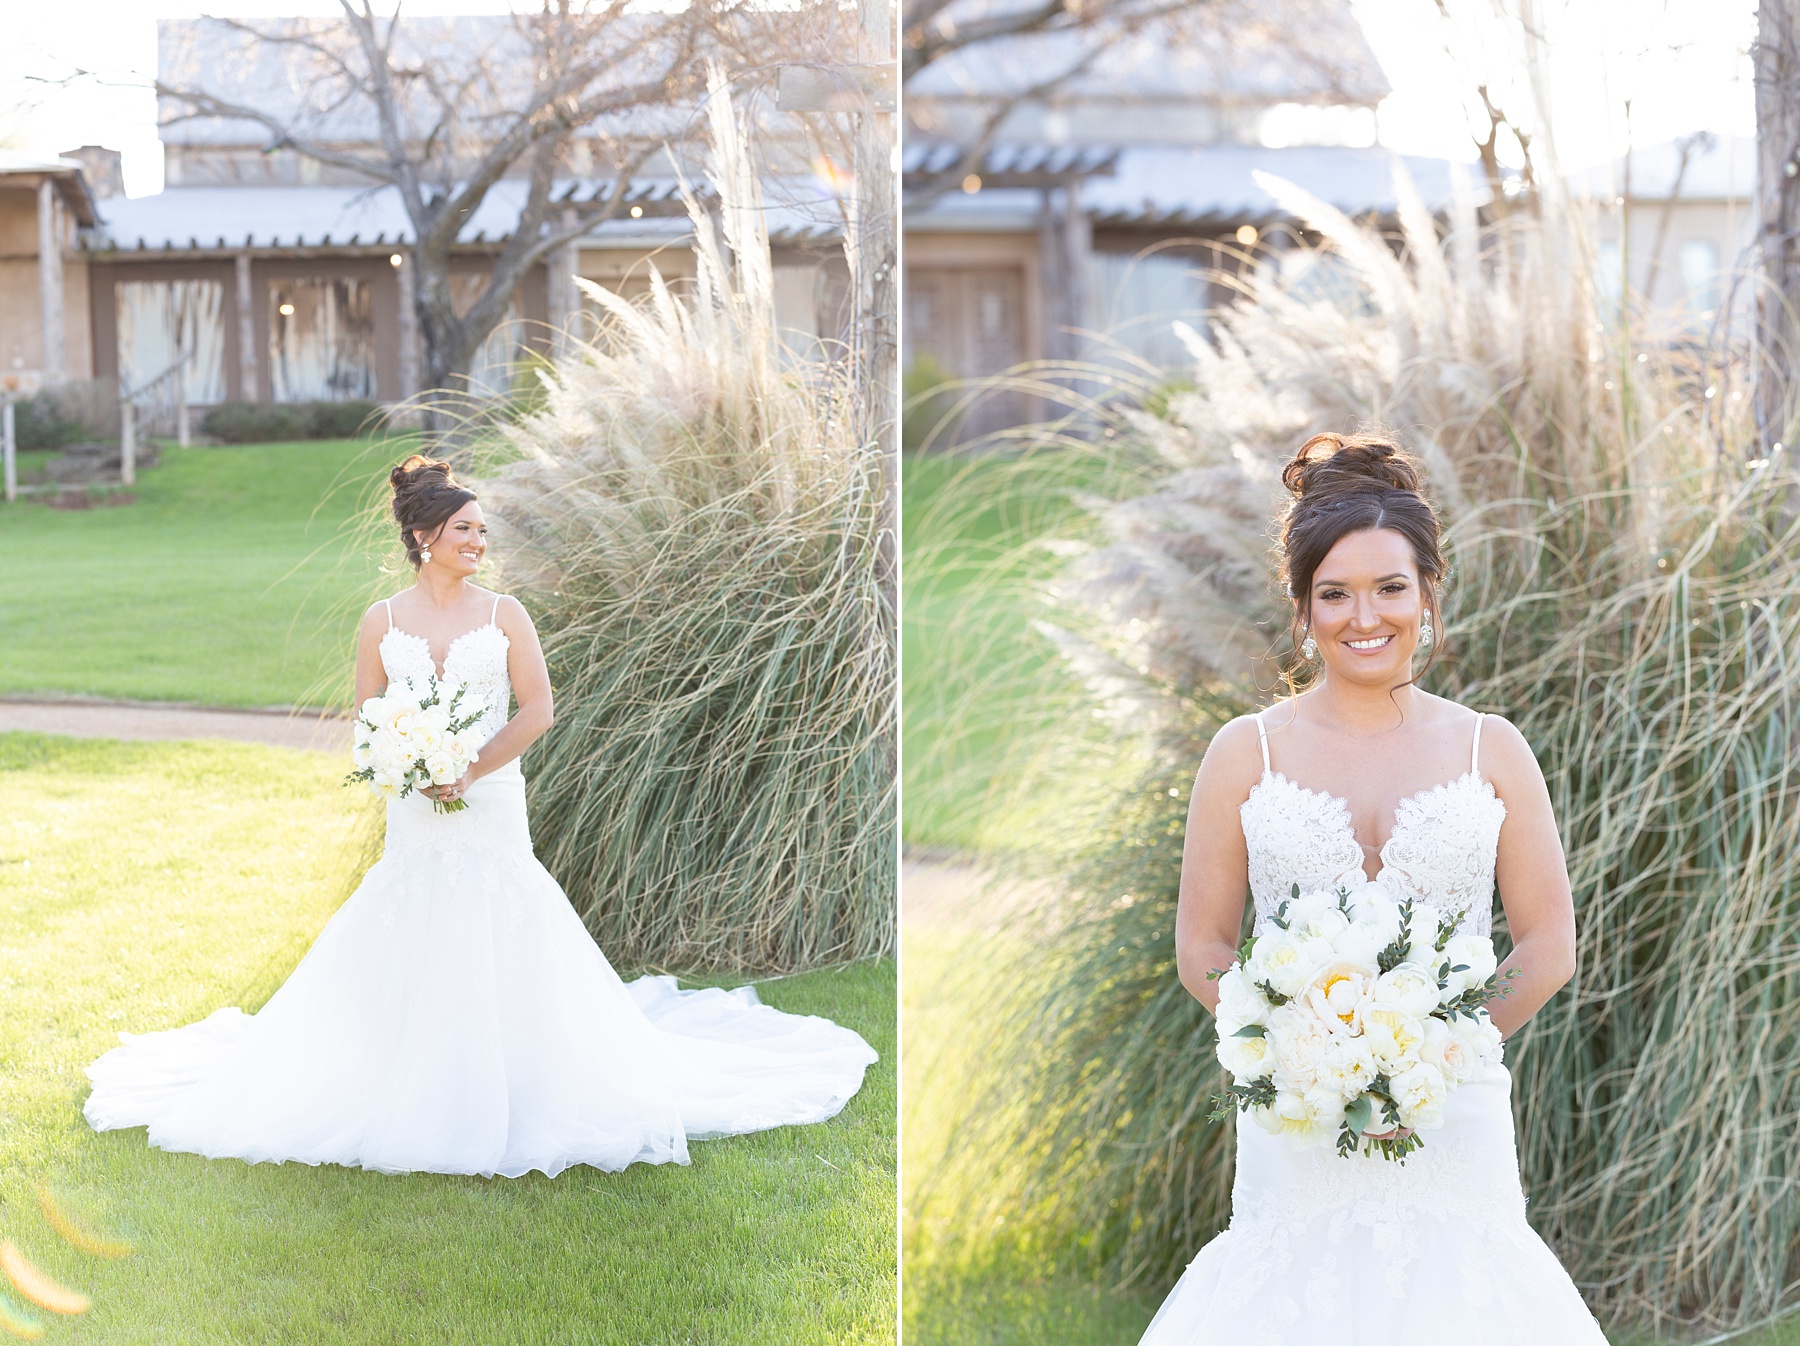 Randi Michelle photographs bridal portraits at The Brooks at Weatherford